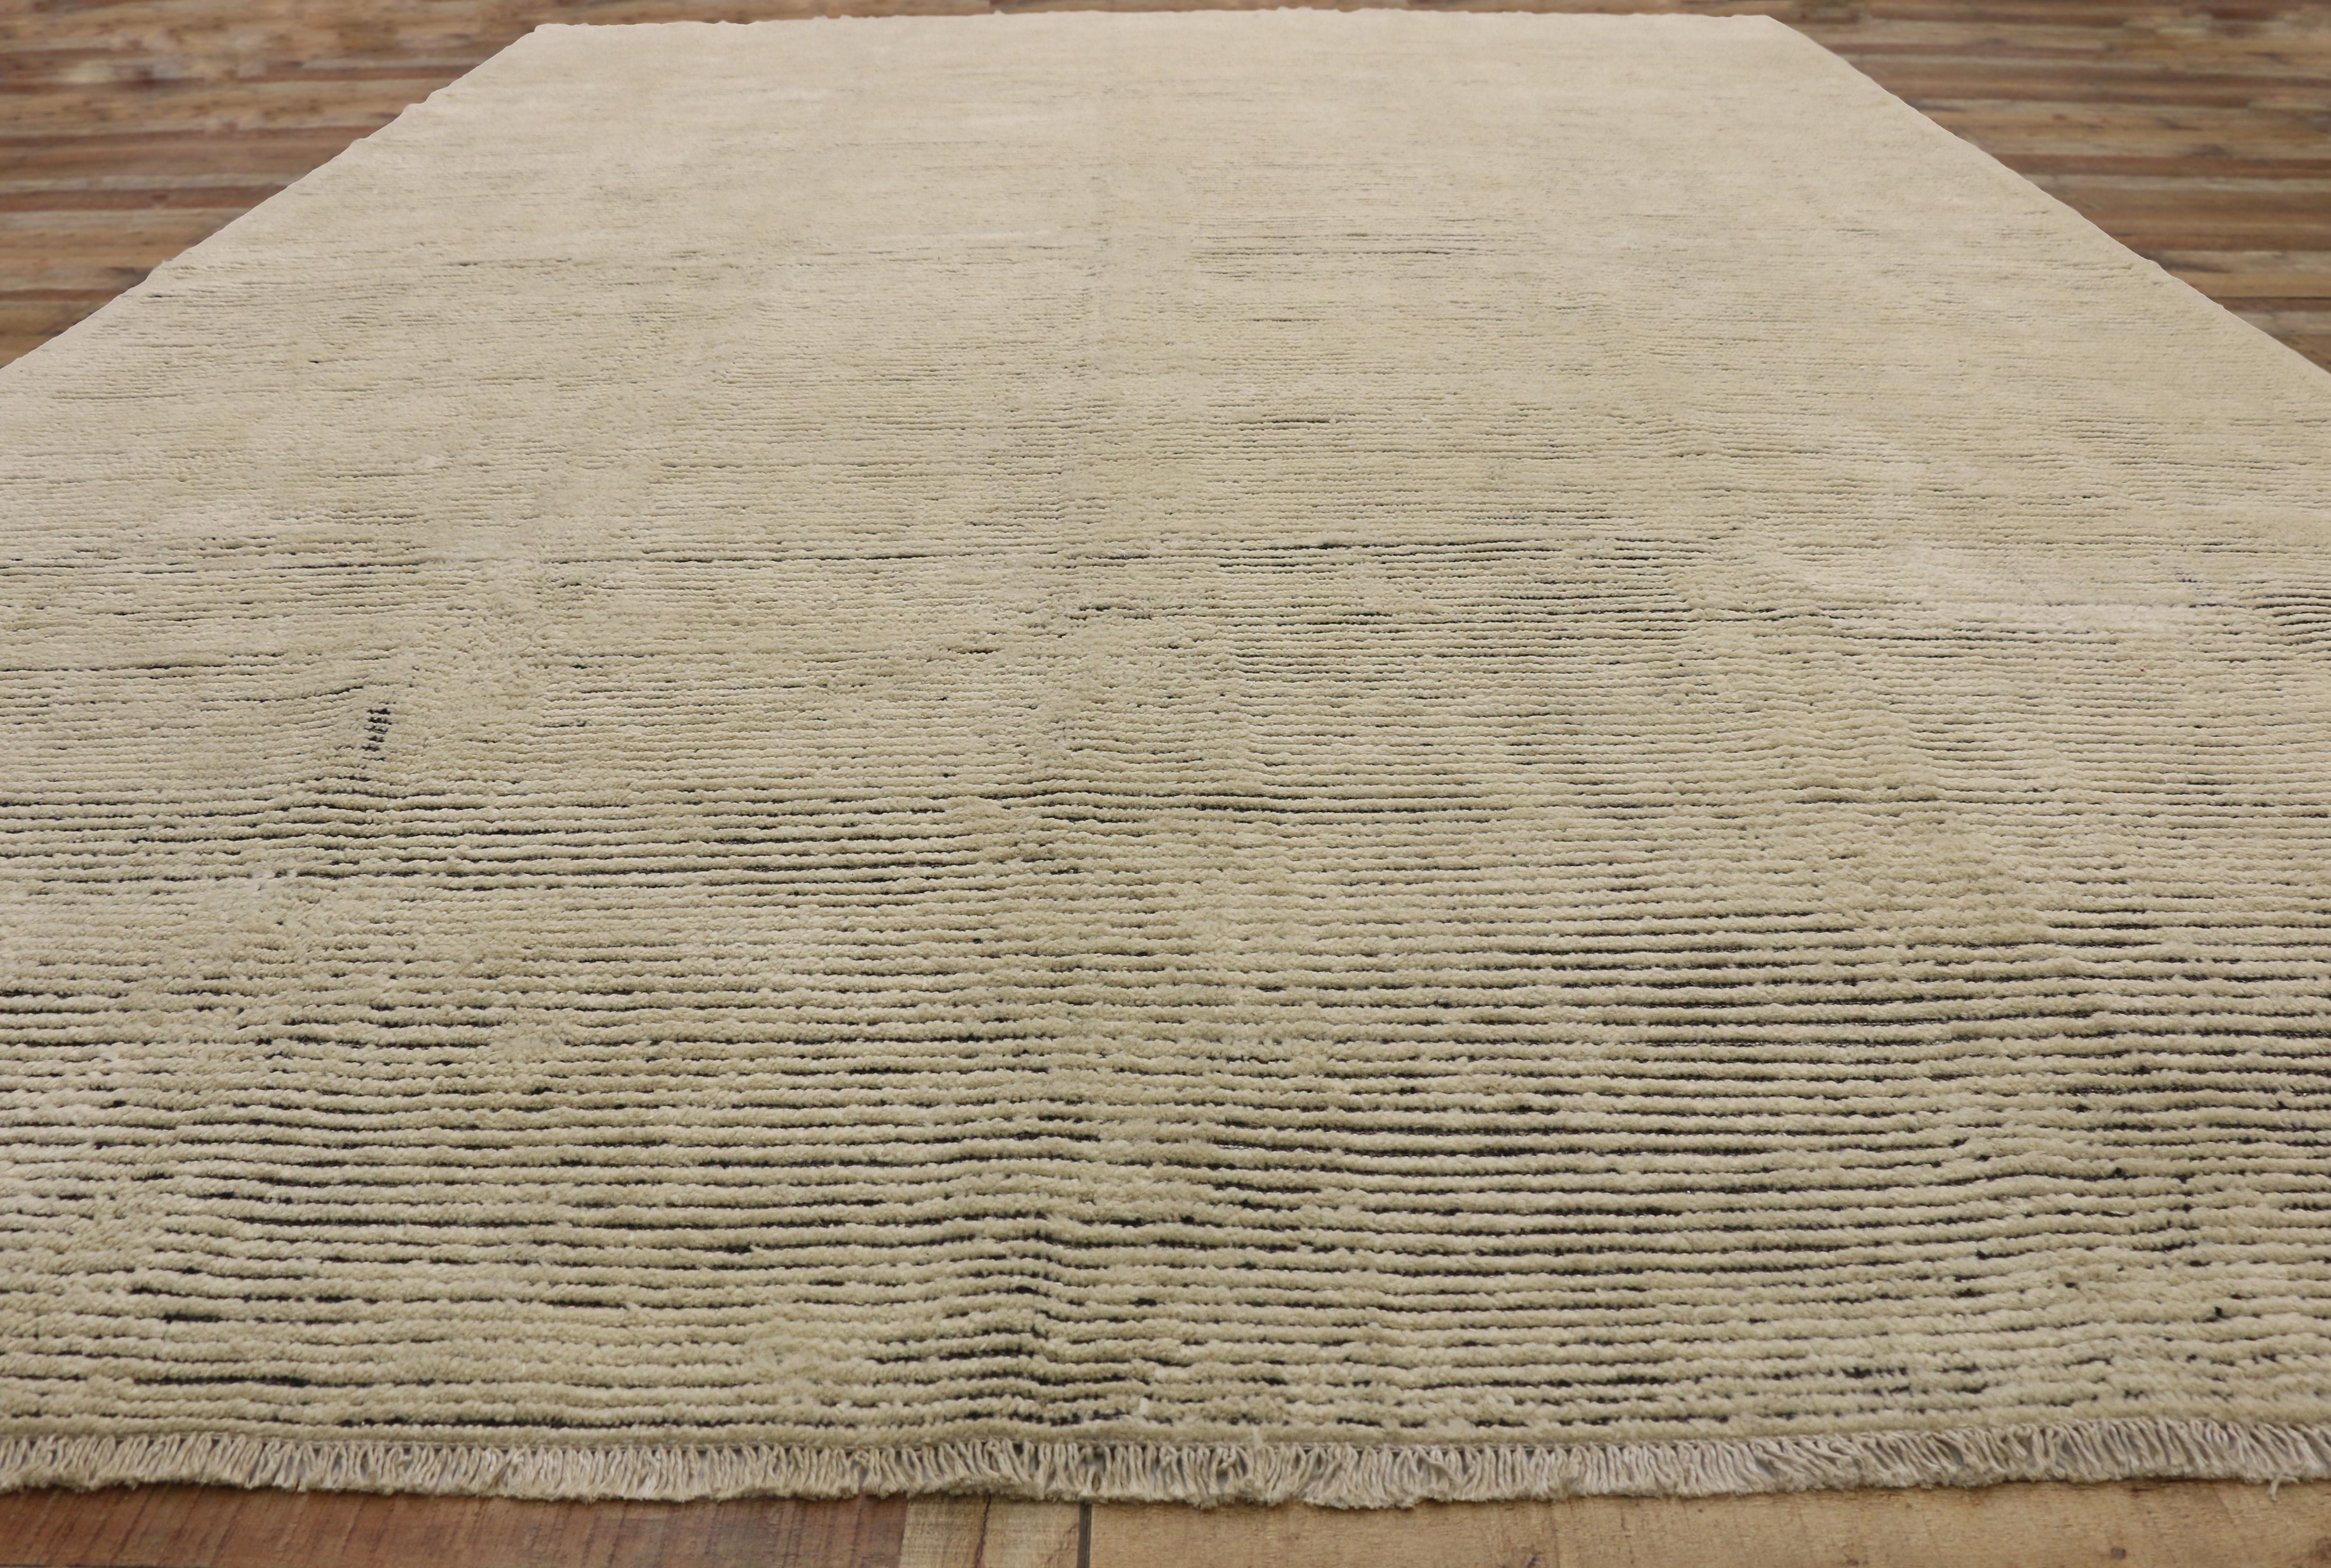 New Contemporary Moroccan Area Rug with Minimalist Organic Modern Style 1